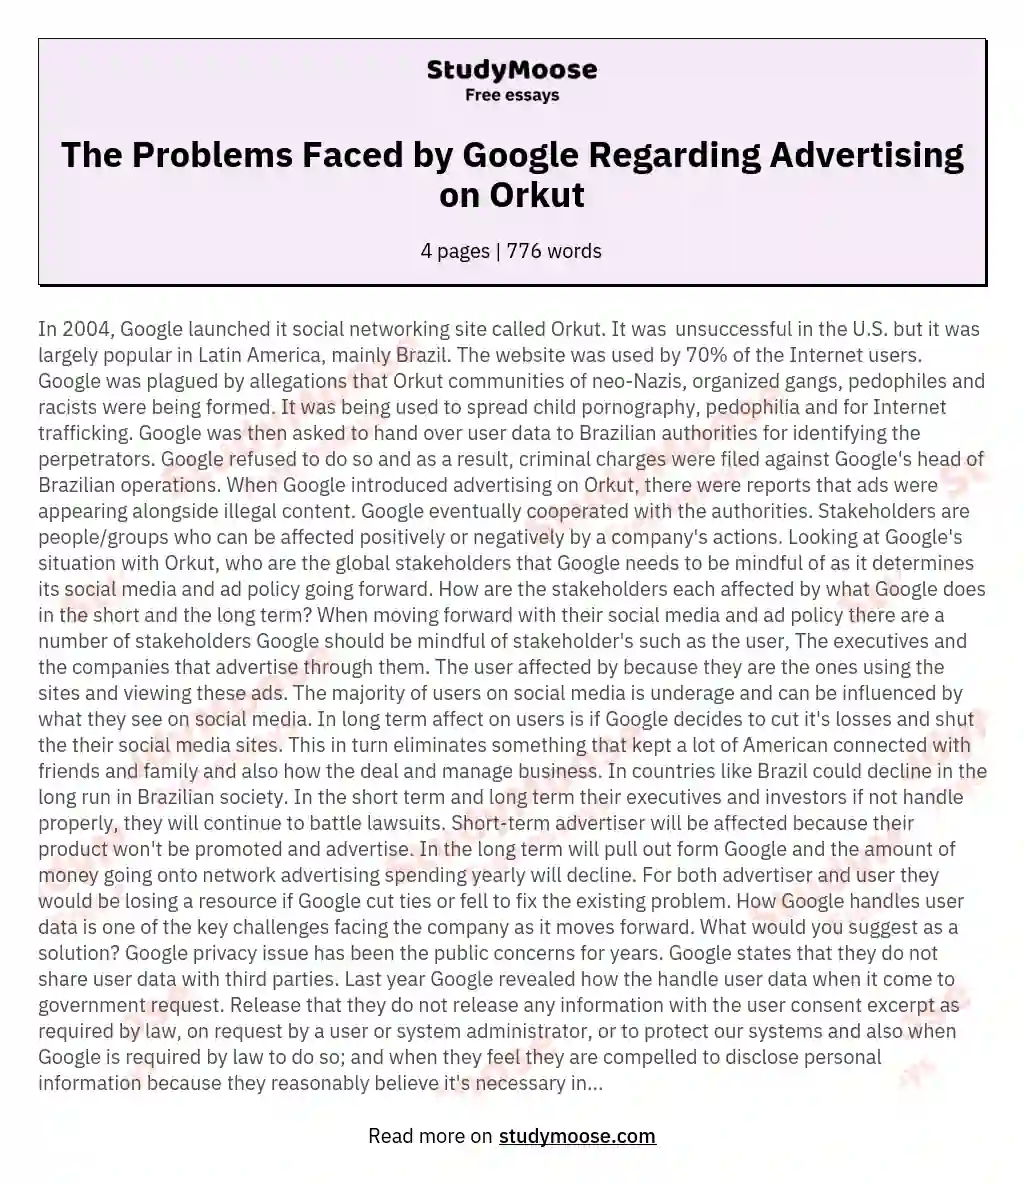 The Problems Faced by Google Regarding Advertising on Orkut essay